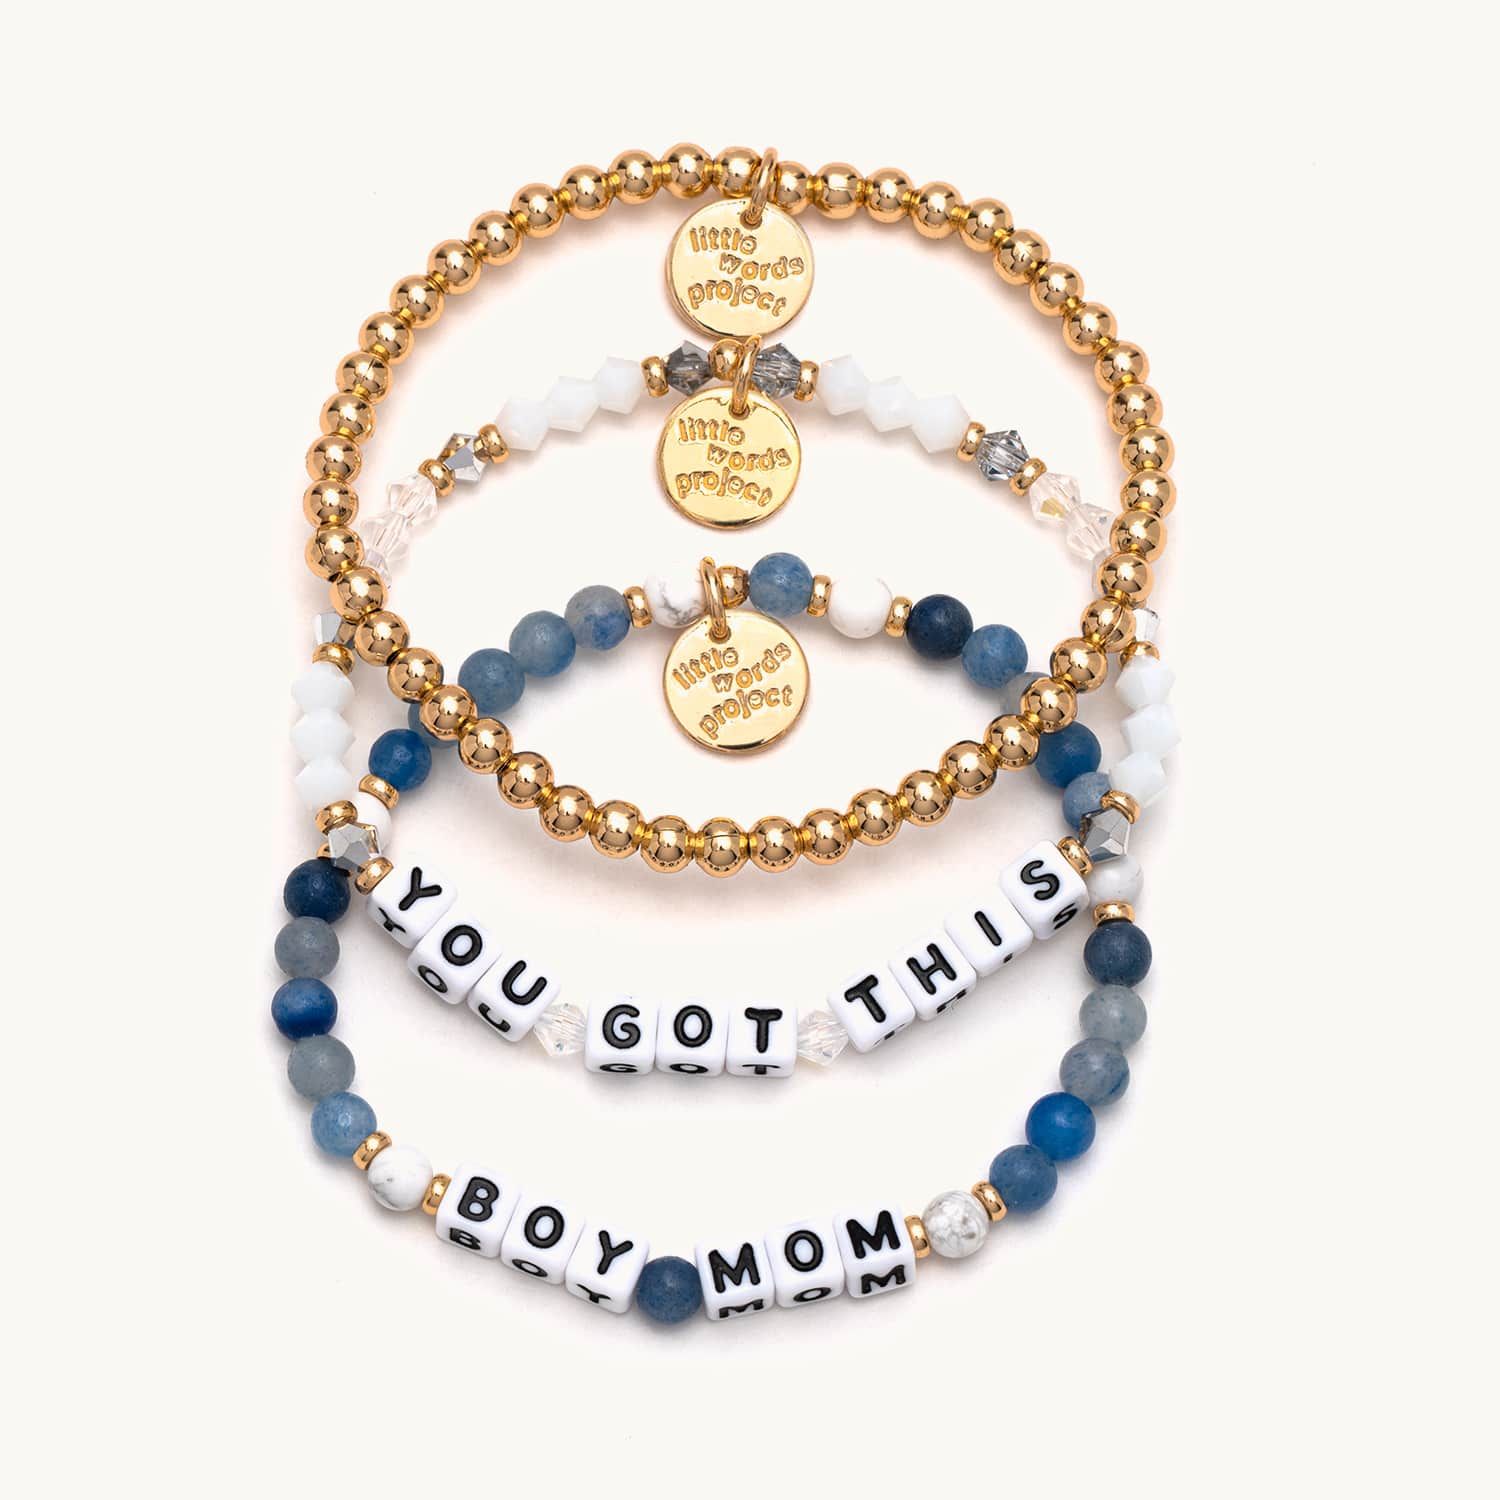 Boy Mom Stack | Little Words Project